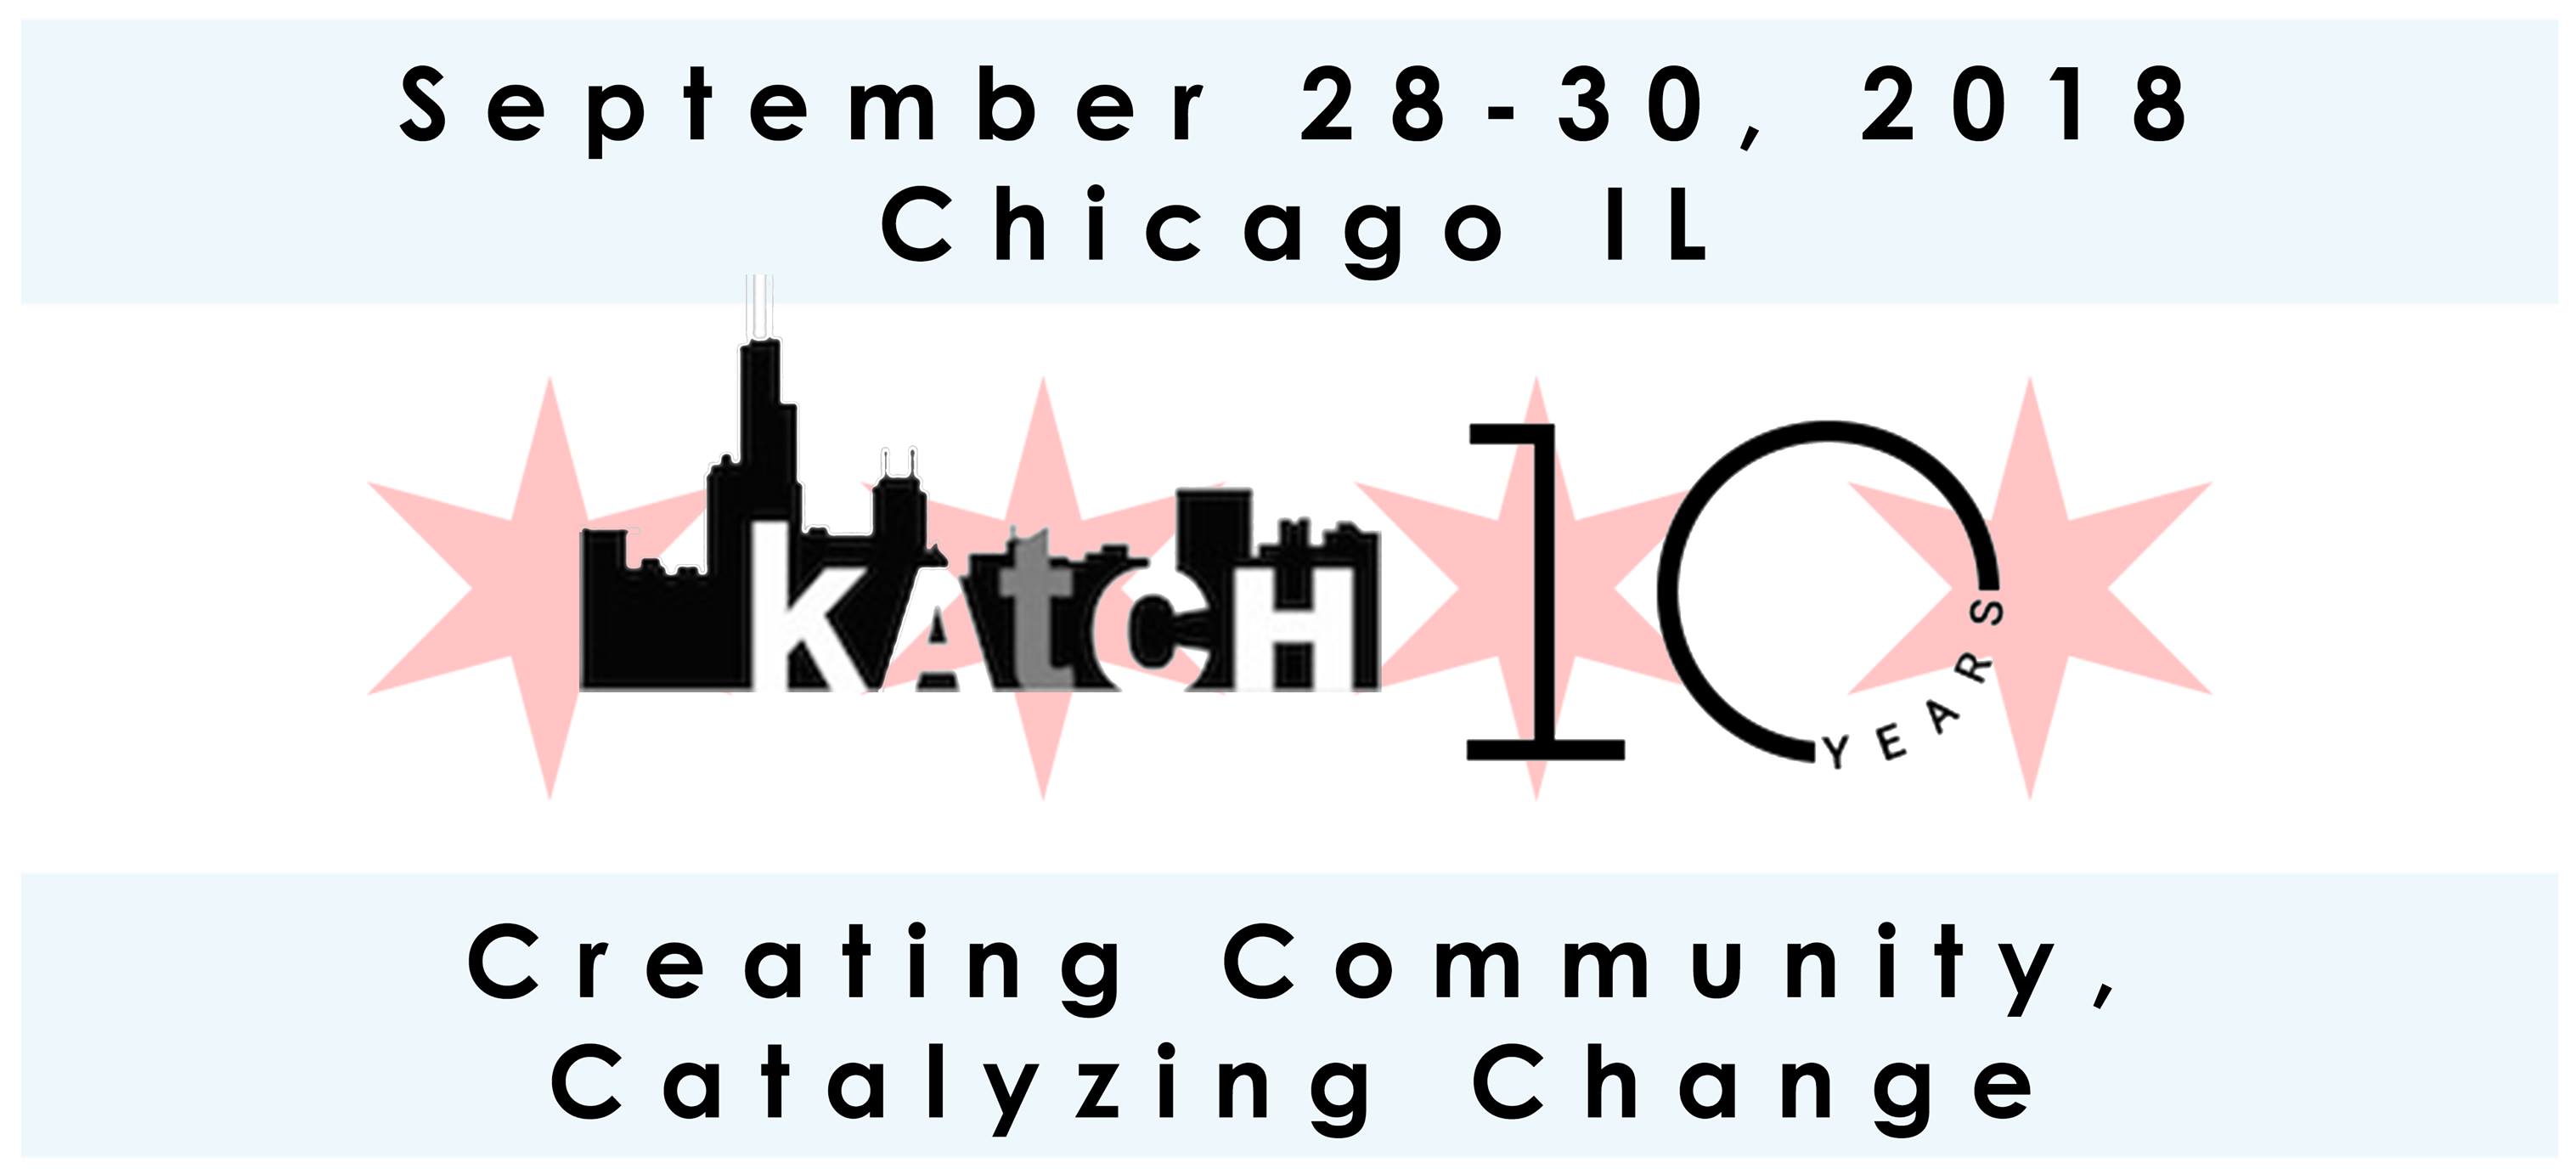 [Save the date] KAtCH 10 Year Anniversary & IKAA Annual Convention in Chicago 28-30 september 2018